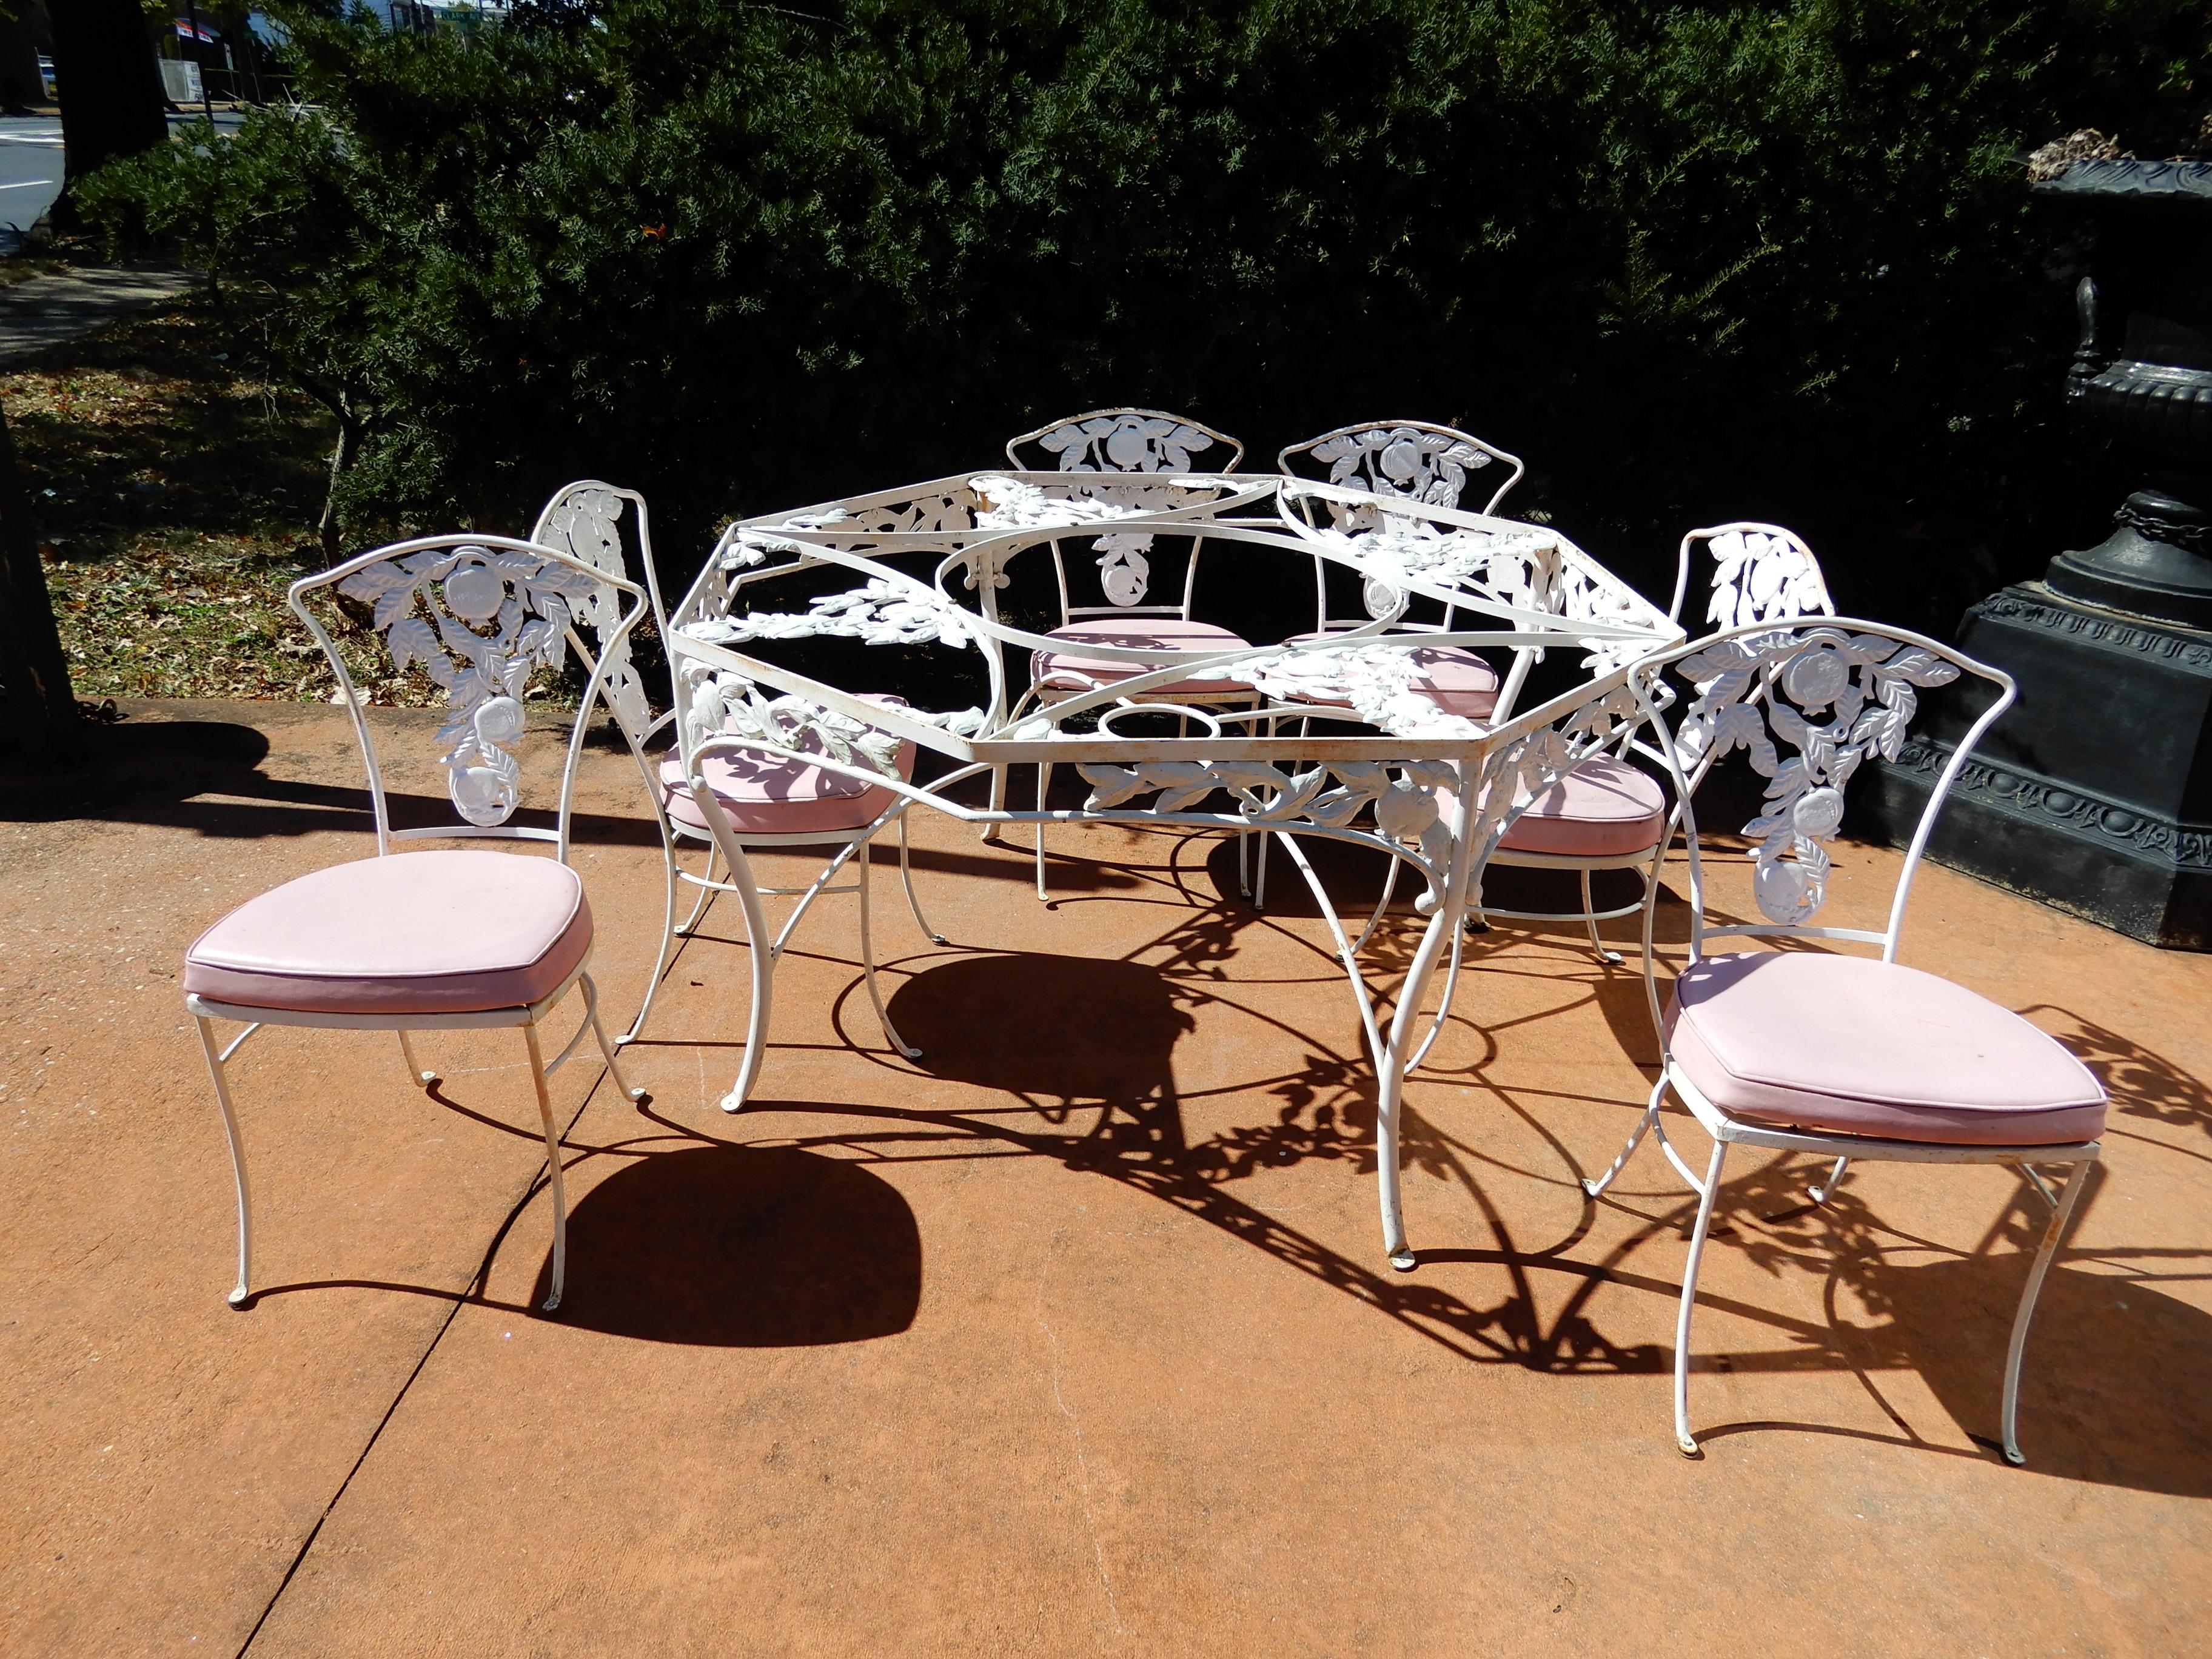 An elaborate cast aluminum dining set in the pomegranate pattern. The table in an octagonal shape and chairs with pomegranates. The set with original pink vinyl seat cushions that exhibit wear.
 